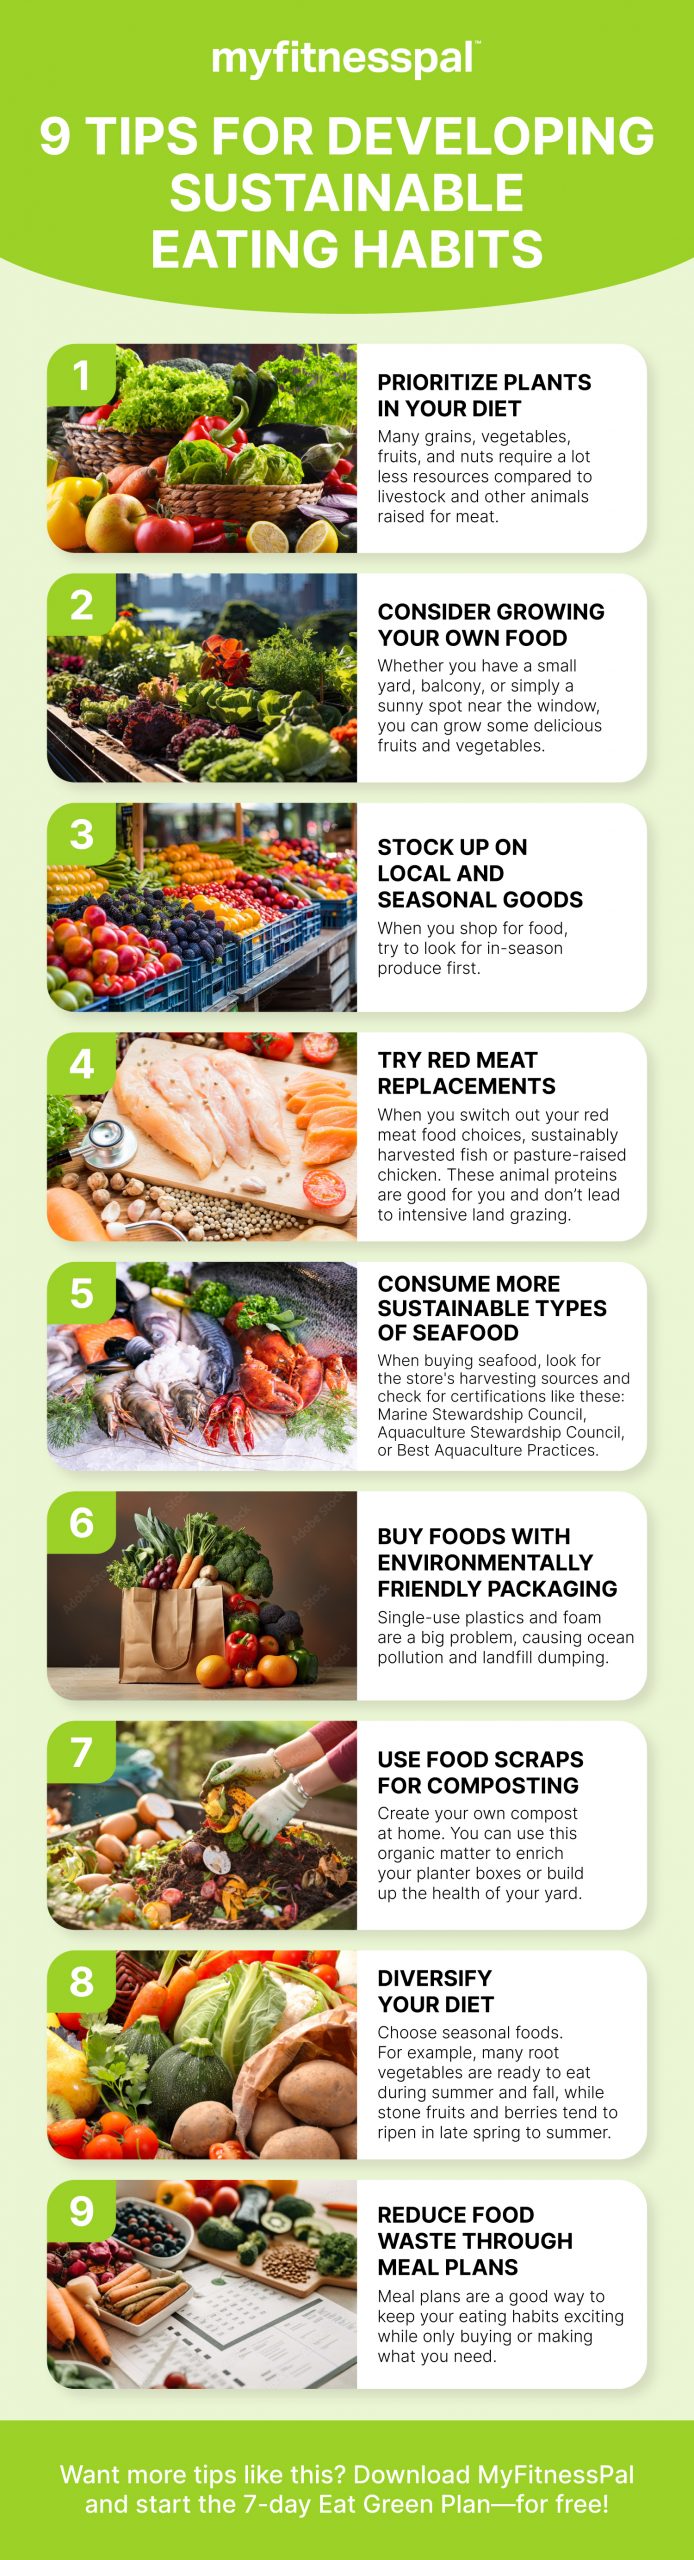 Tips for eating sustainably INFOGRAPHIC